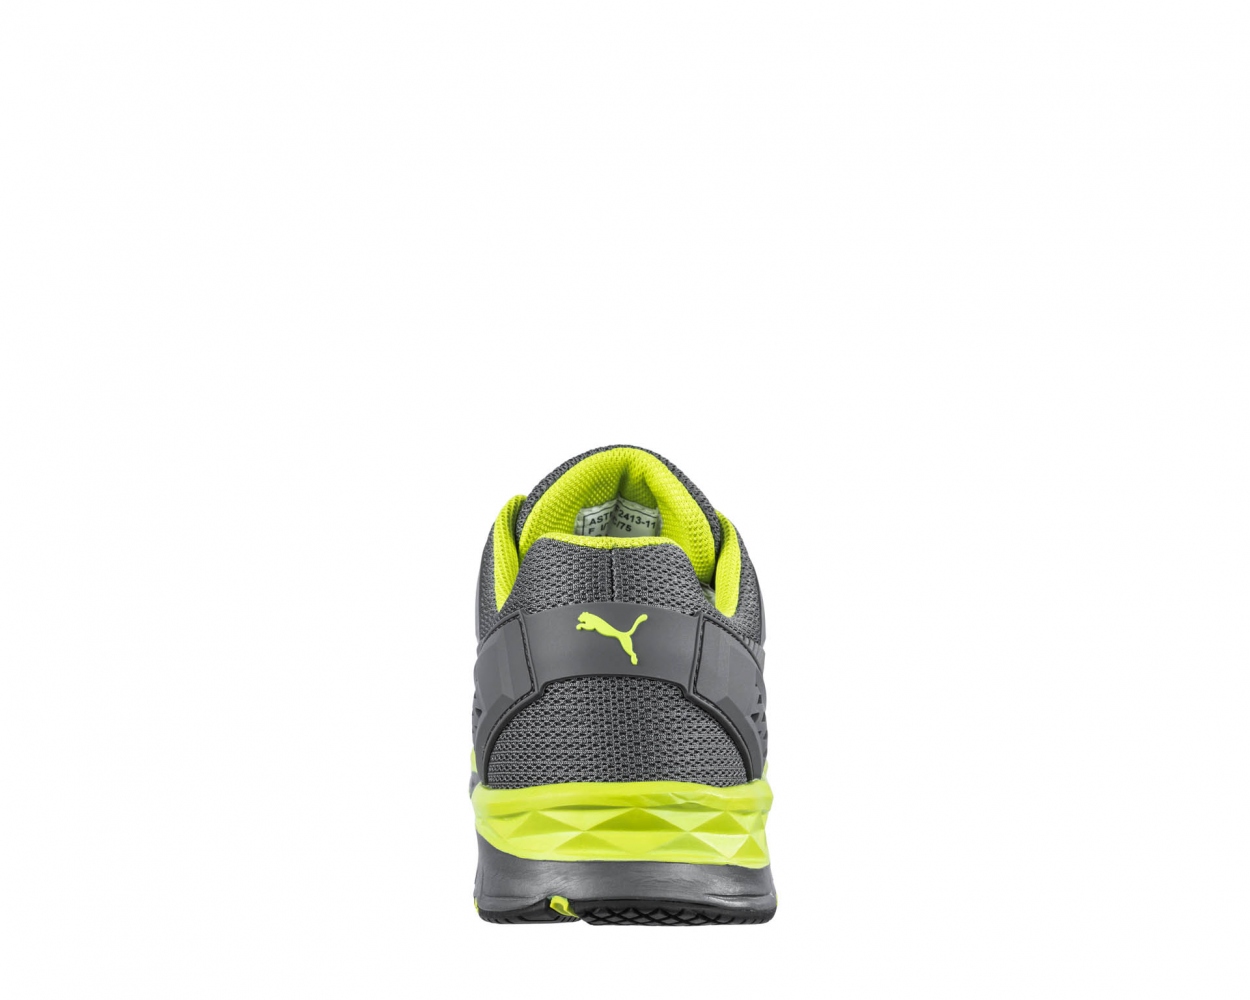 Euro HRO 2.0 - ESD | online MOTION PUMA Industry safety purchase 643880 SRC FUSE shoes S1P